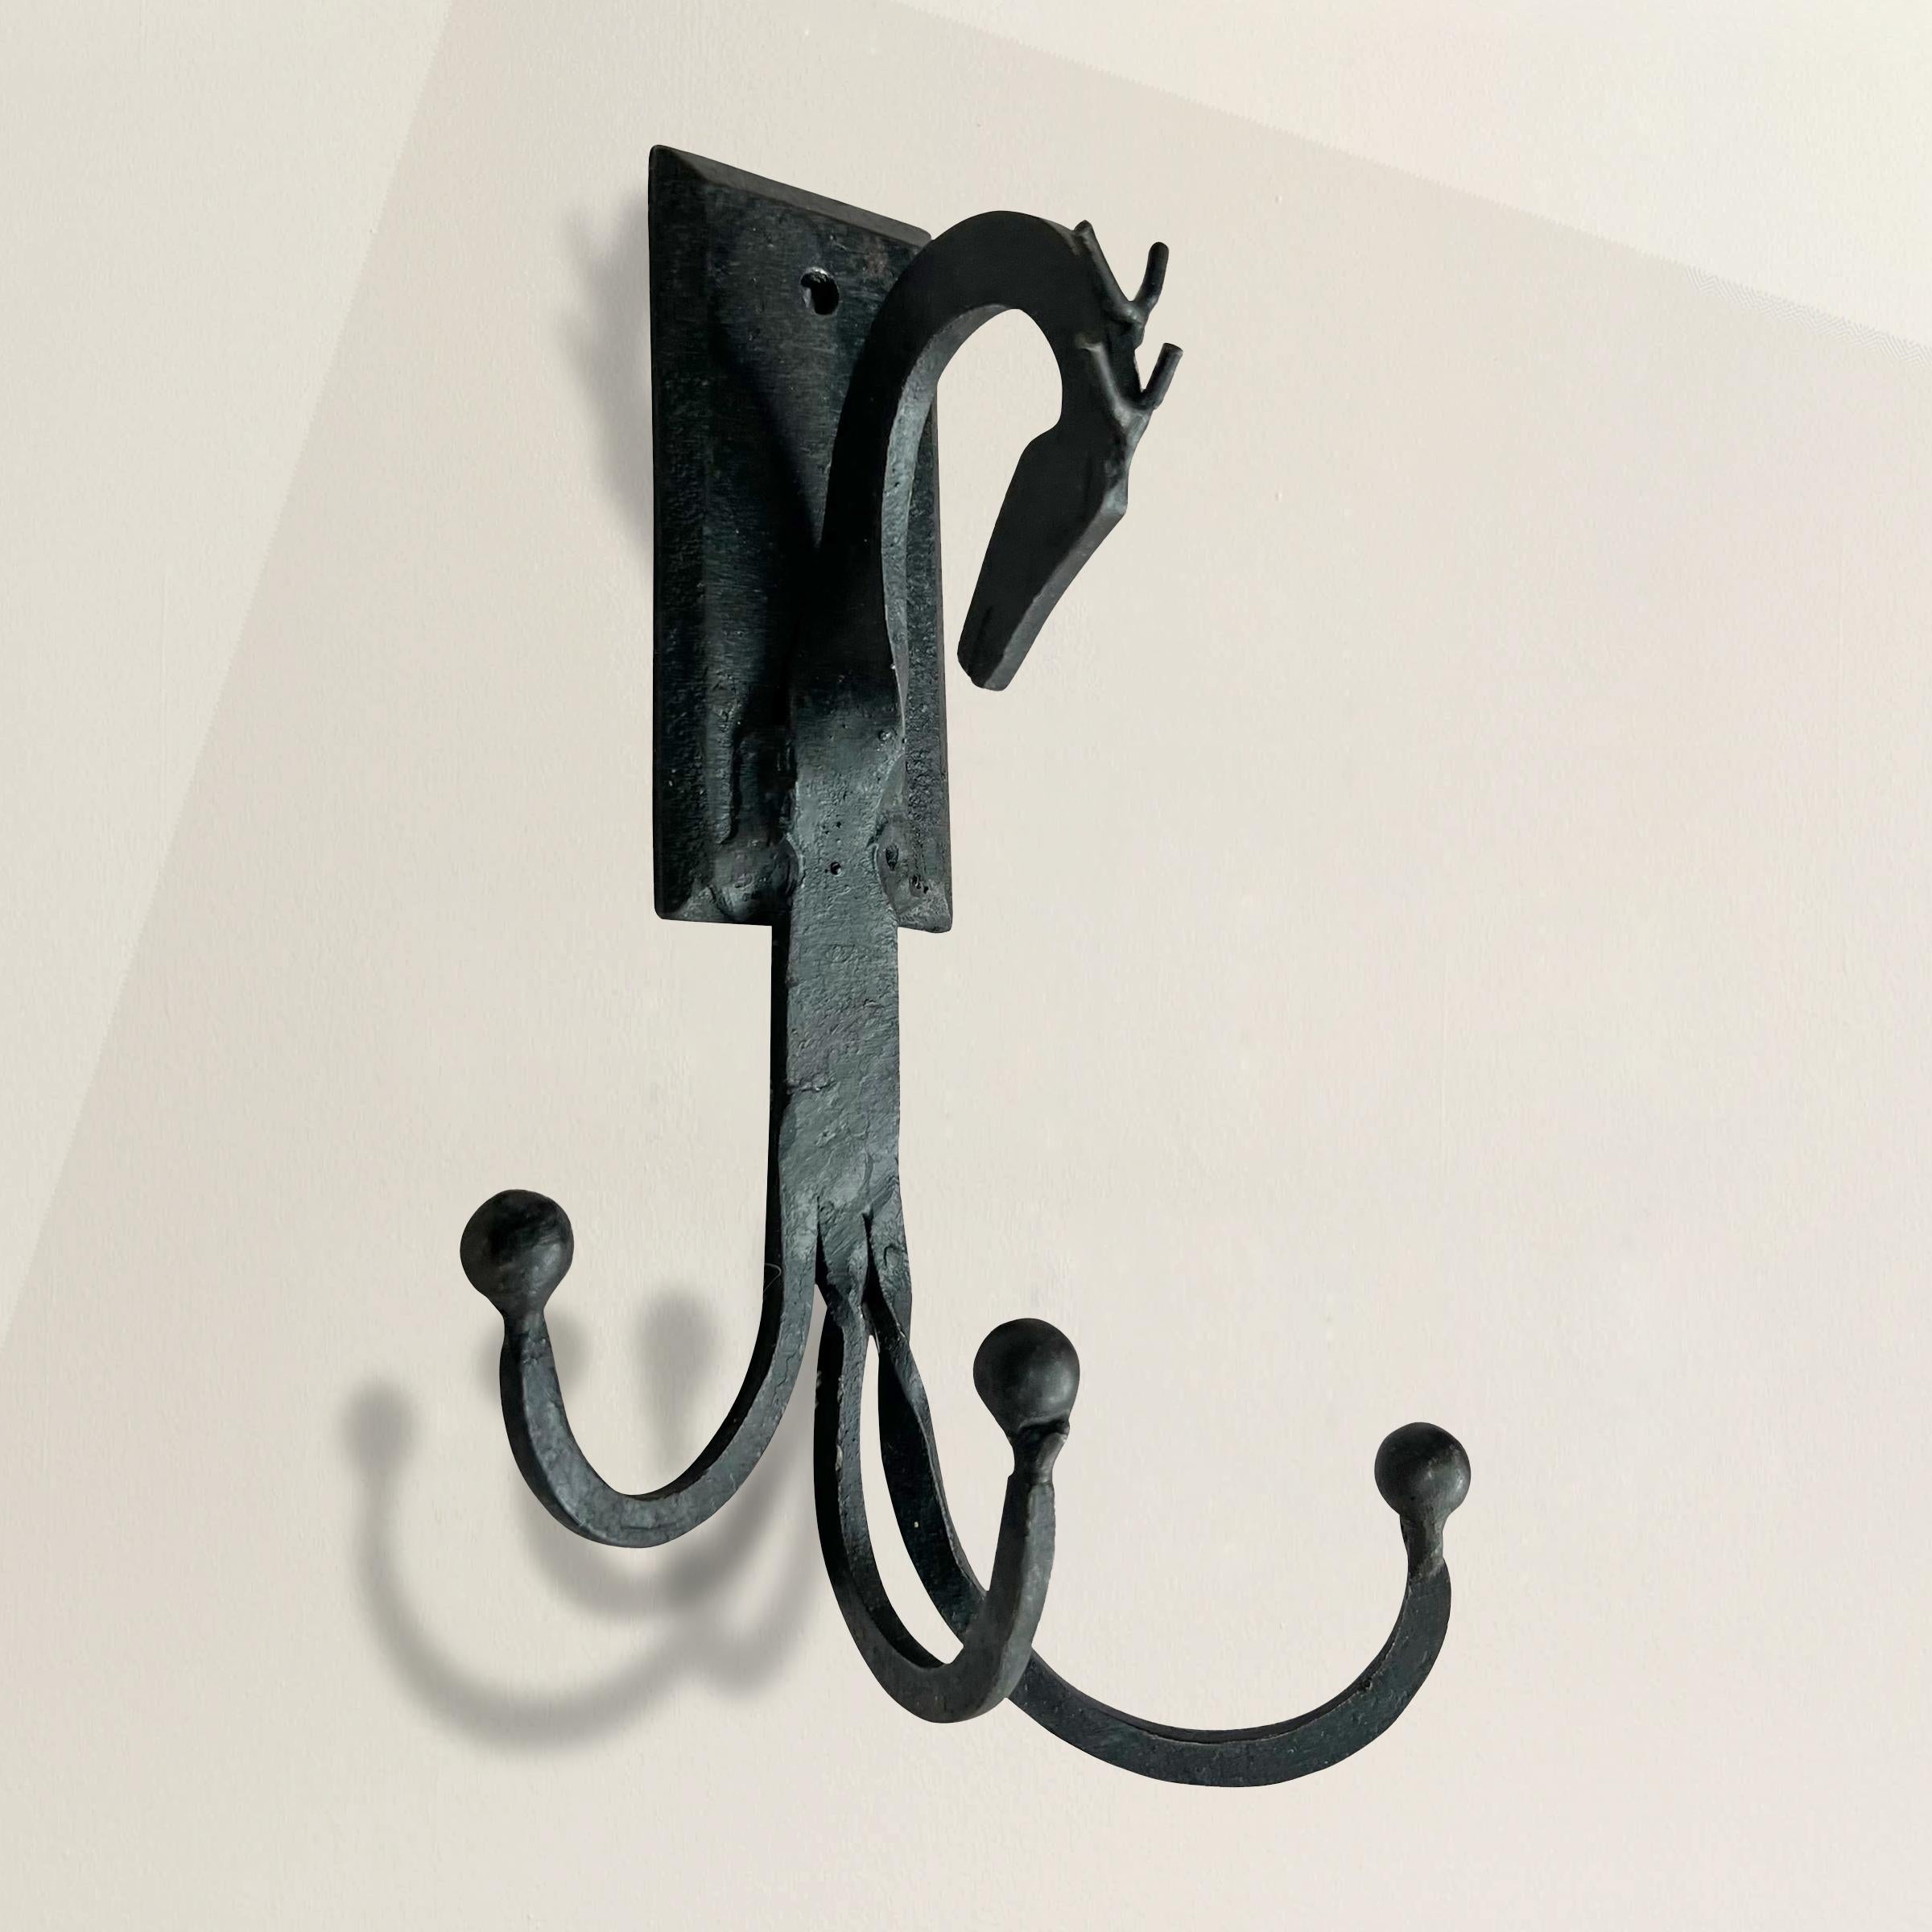 Add a touch of vintage charm and practicality to your space with this exquisite American hand-wrought iron wall hook. Crafted with artistry and attention to detail, this wall hook features a unique horse-head finial that adds a whimsical element to